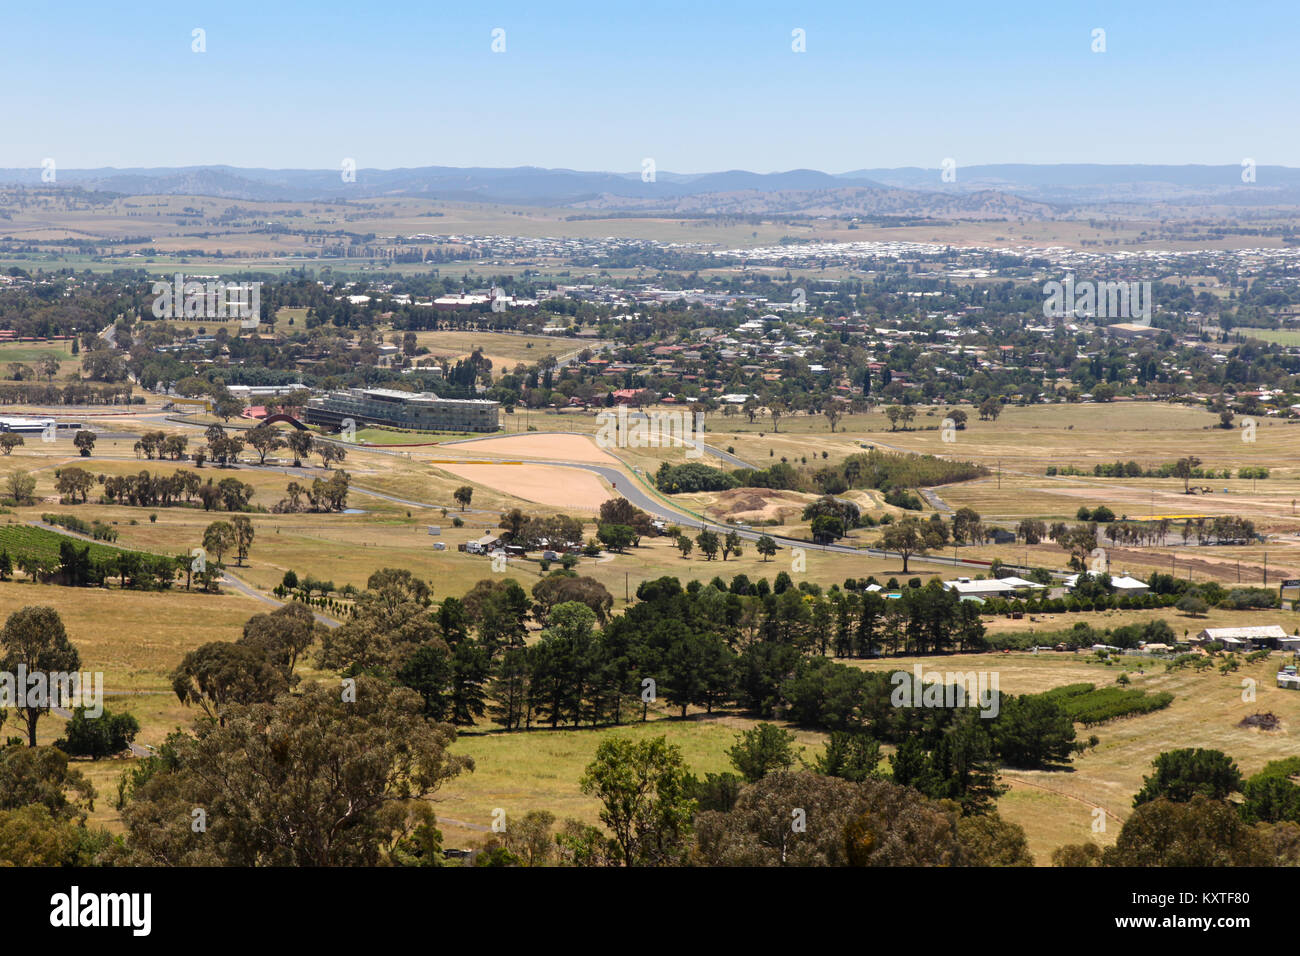 View of the regional country city of Bathurst from the famous Mount Panorama home of Australia's most famous motor car race. Bathurst is located in th Stock Photo